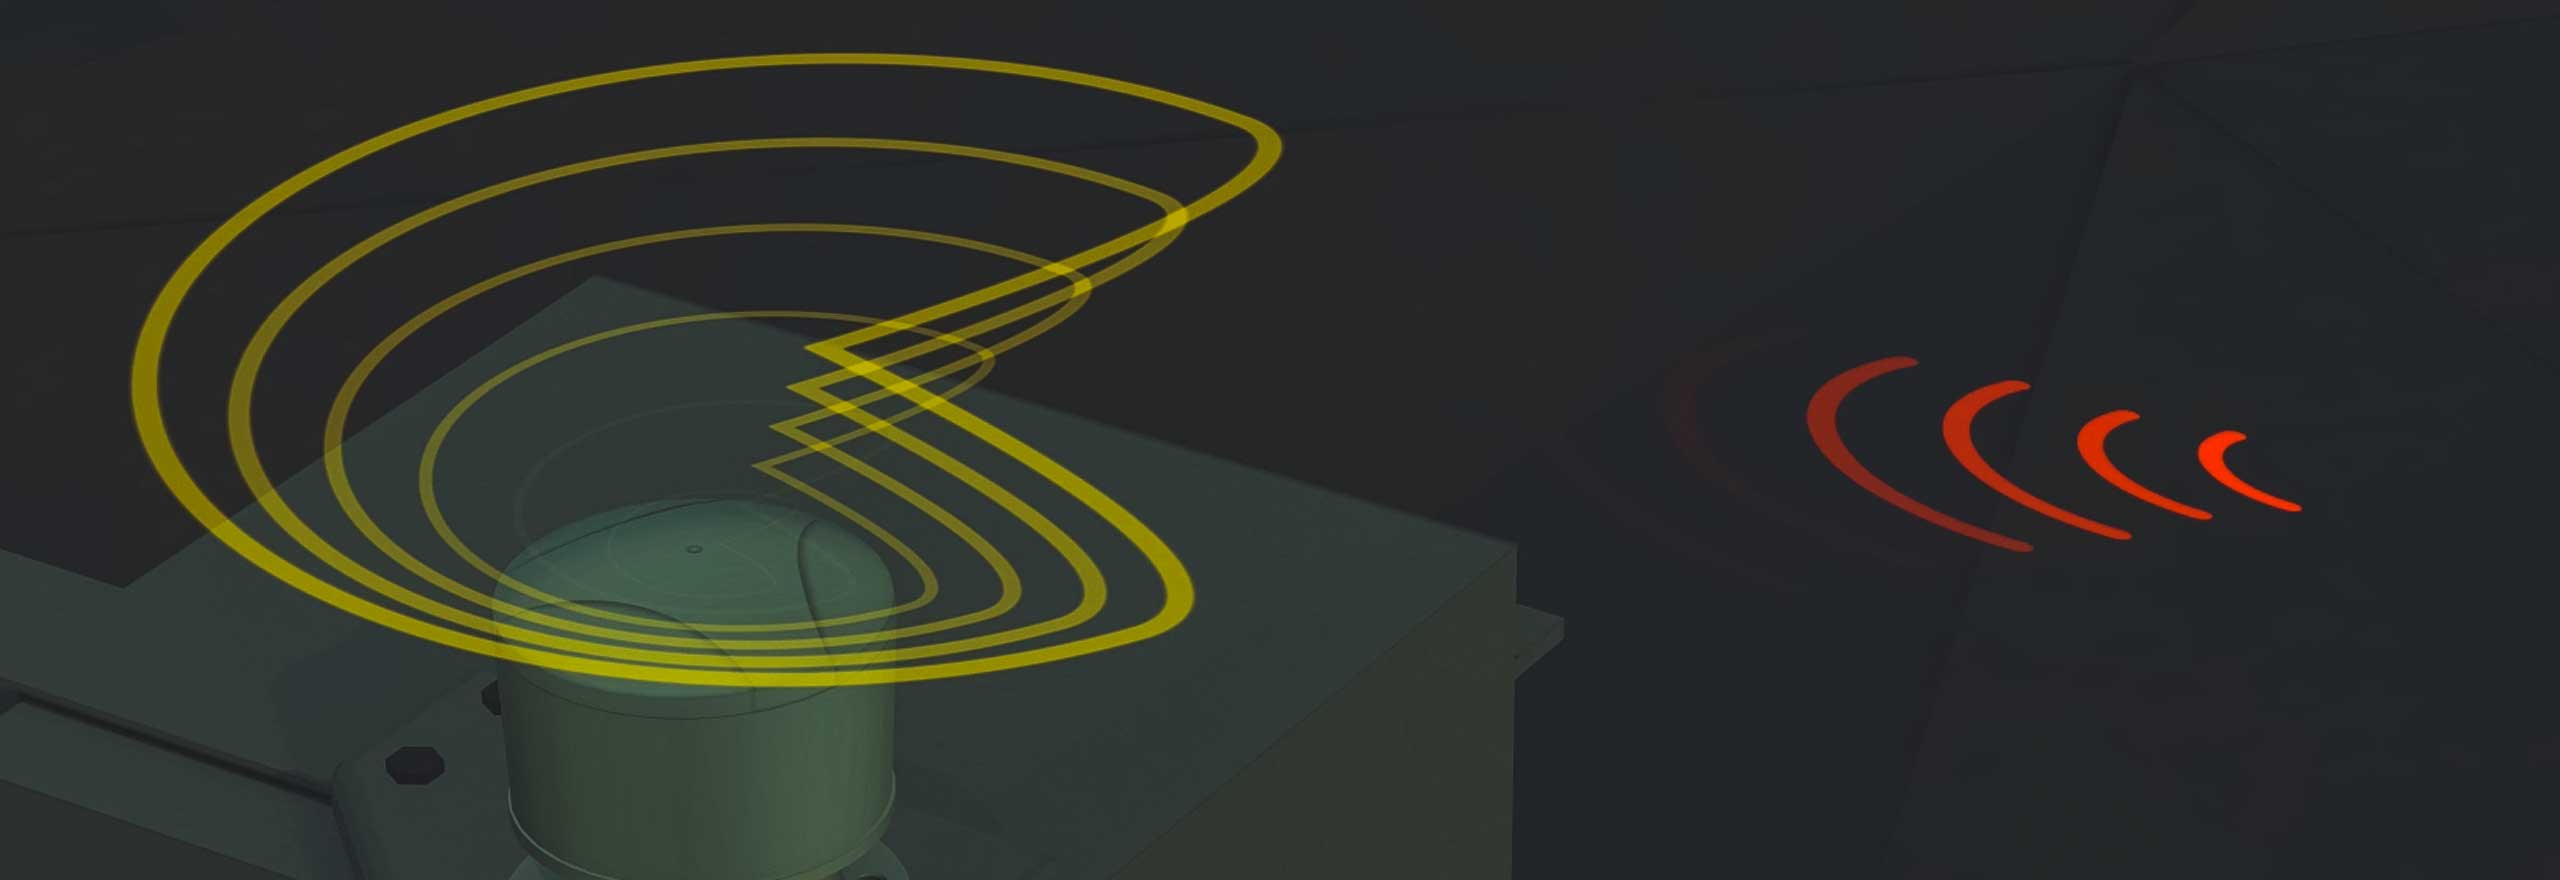 An animated image showing how GPS anti-jam technology identifies and mitigates interference and jamming.